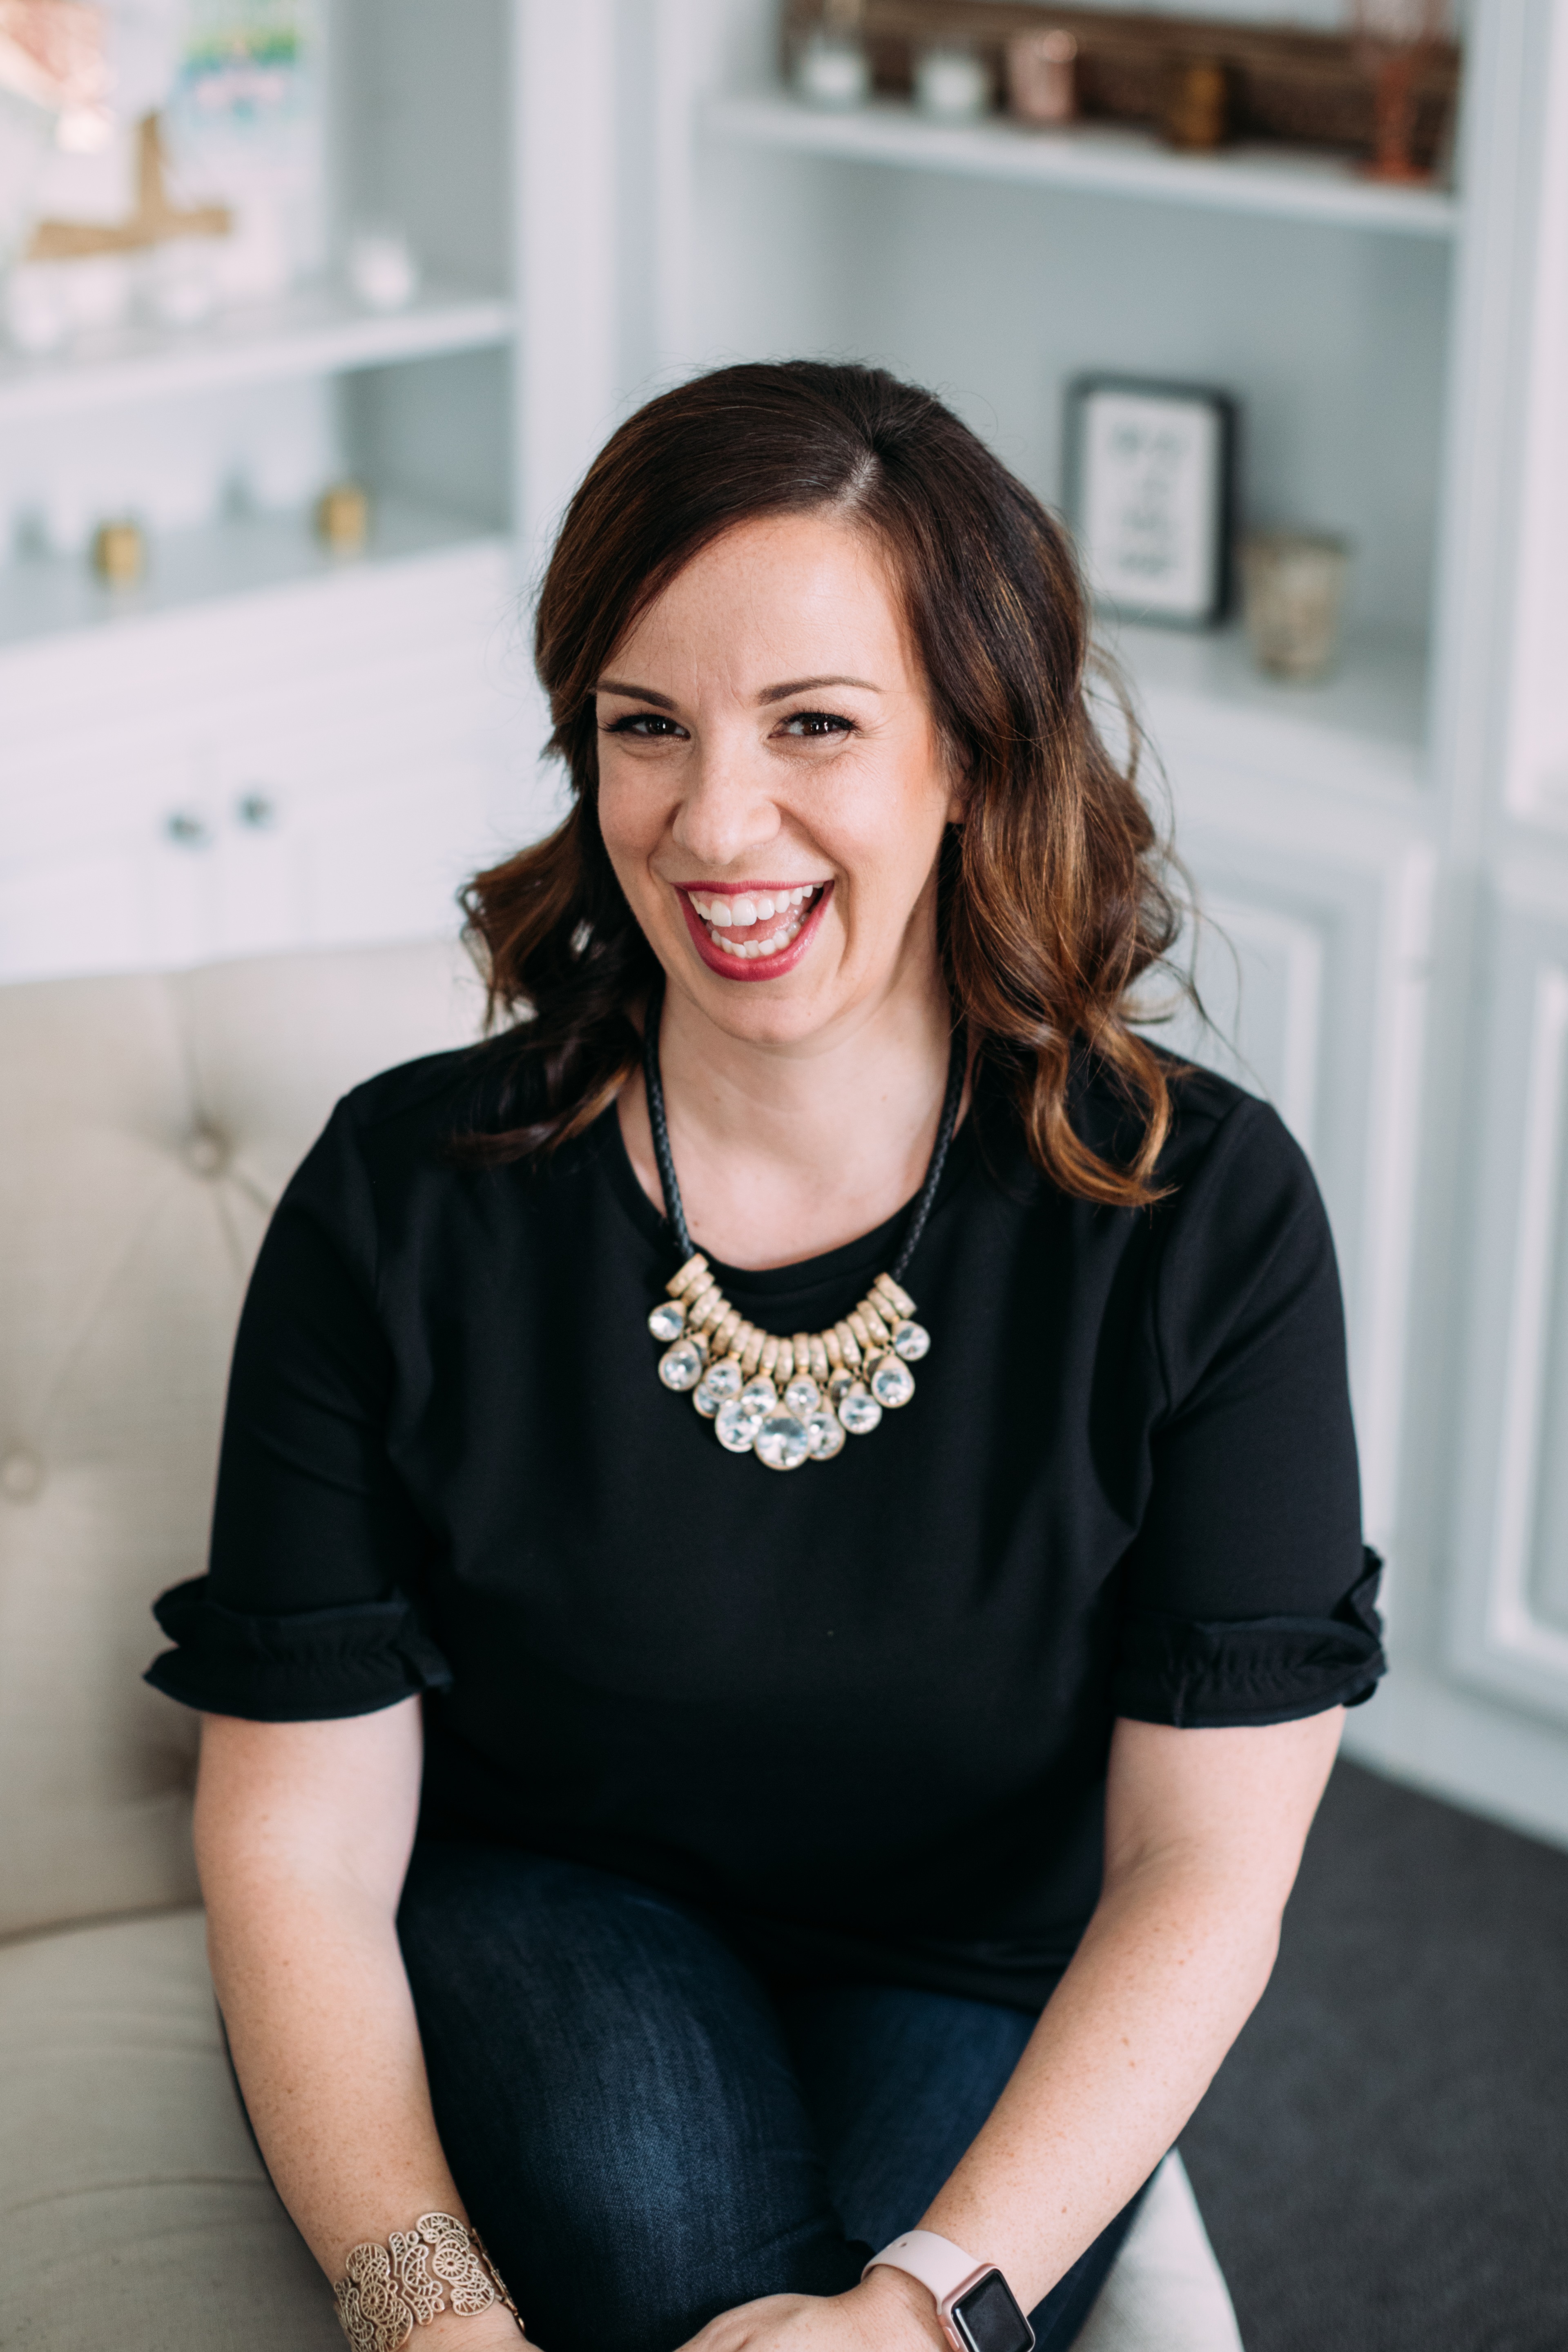 Megan Gillikin from A Southern Soiree and The Weddin gs For Real Podcast shares her business journey. Listen to her story on burnout, pruning your business, discovering what’s important, and balancing it all well. Listen to the episode of The Power in Purpose Podcast, a podcast for creative entrepreneurs #candicecoppola #podcast #weddingpros